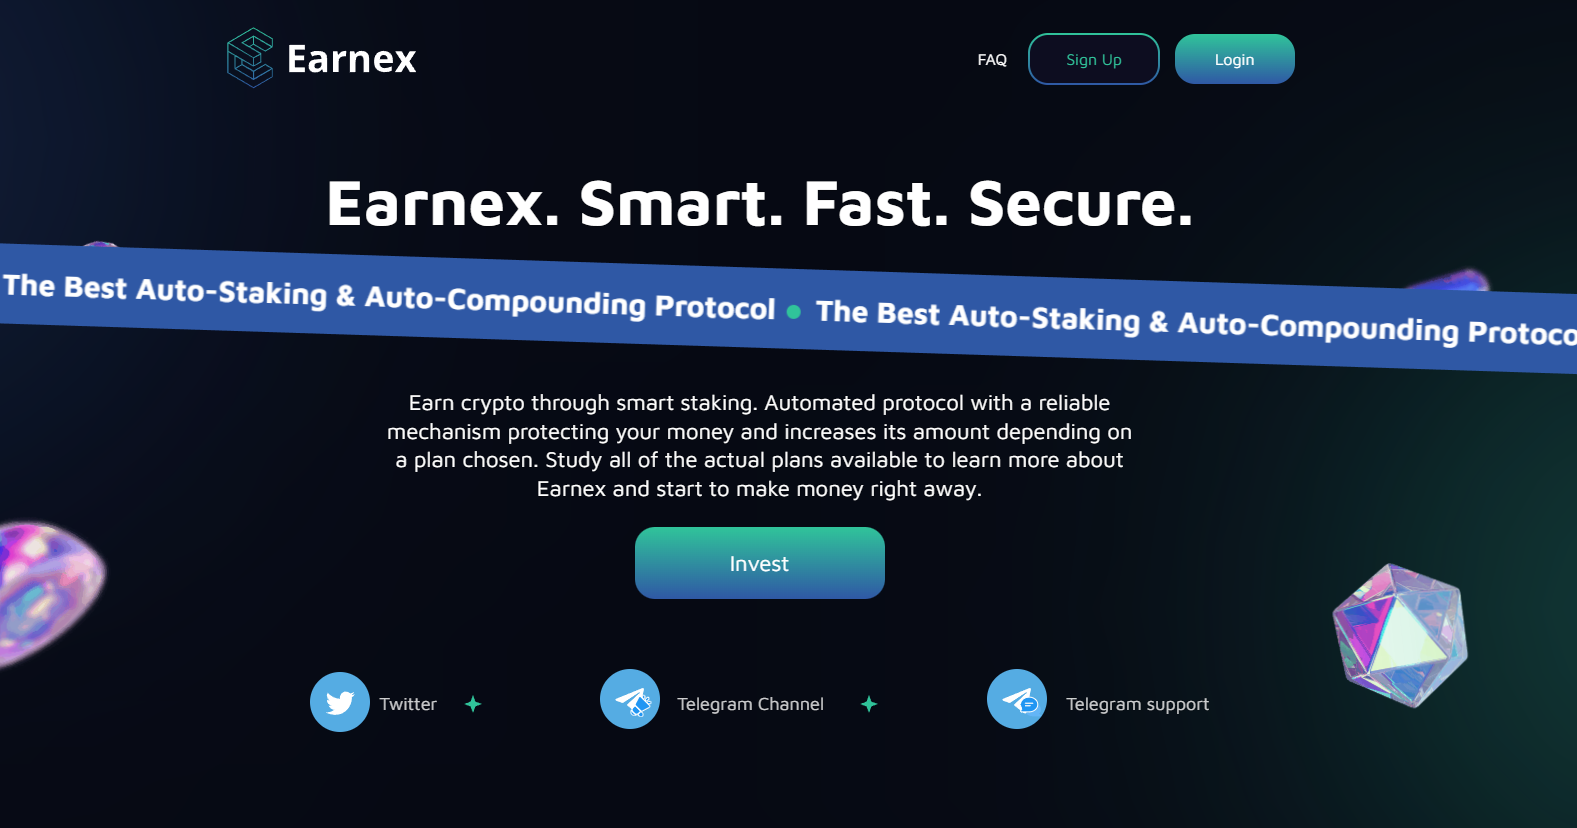 earnex.cc review, earnex.cc new hyip review,earnex.cc scam or paying,earnex.cc scam or legit,earnex.cc full review details and status,earnex.cc payout proof,earnex.cc new hyip,earnex.cc oxifinance hyip,new hyip,best hyip,legit hyip,top hyip,hourly paying hyip,long term paying hyip,instant paying hyip,best investment project